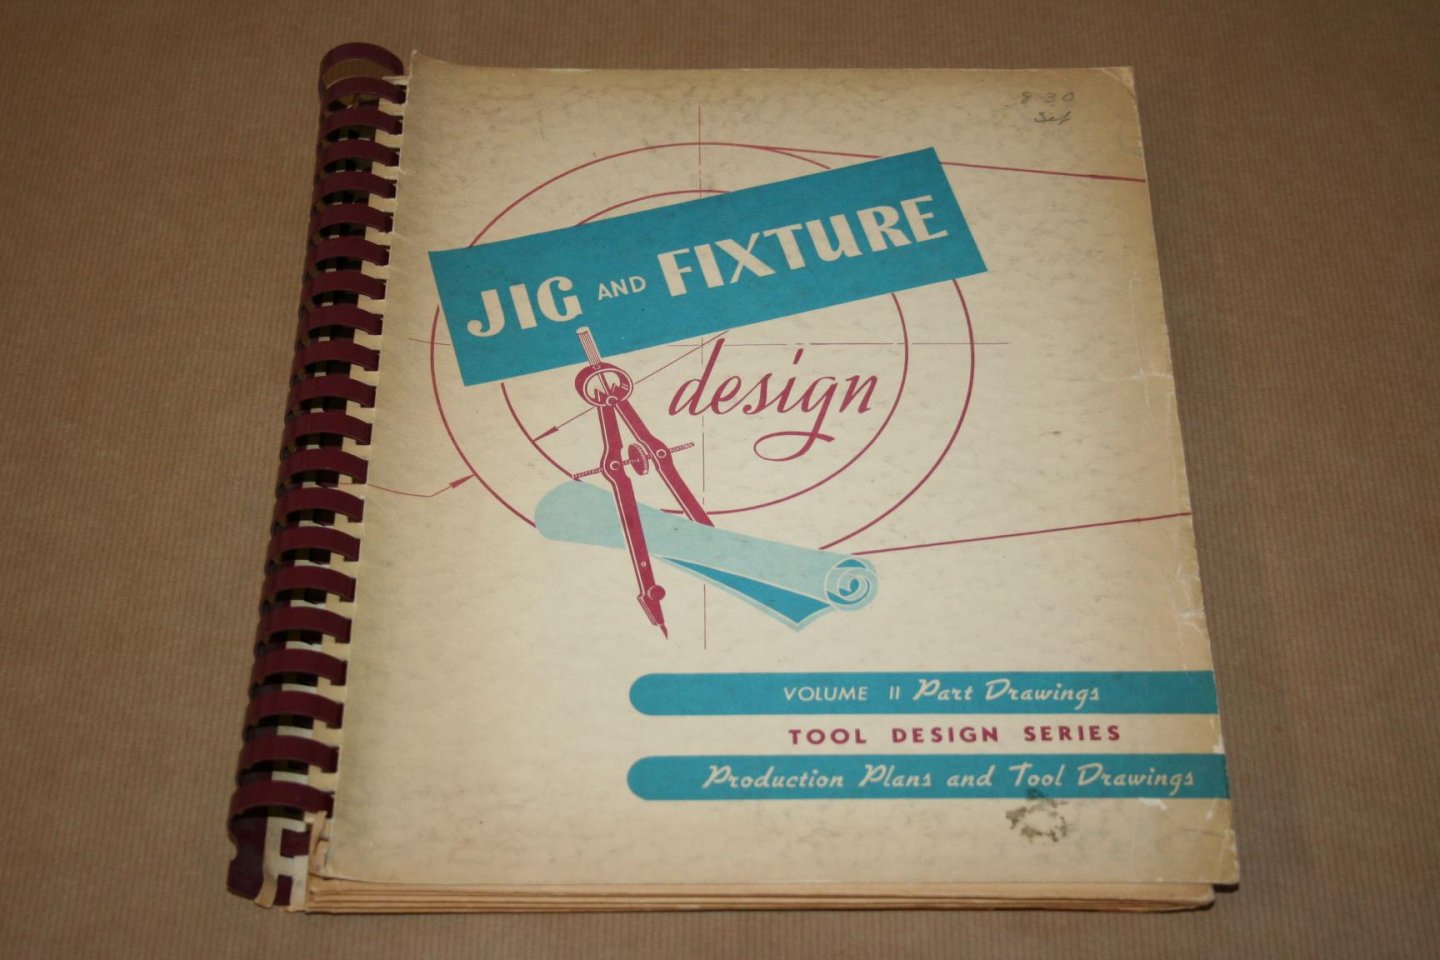  - Jig and Fixture Design --  Volume II  Part Drawings - Production Plans and Tool Drawings